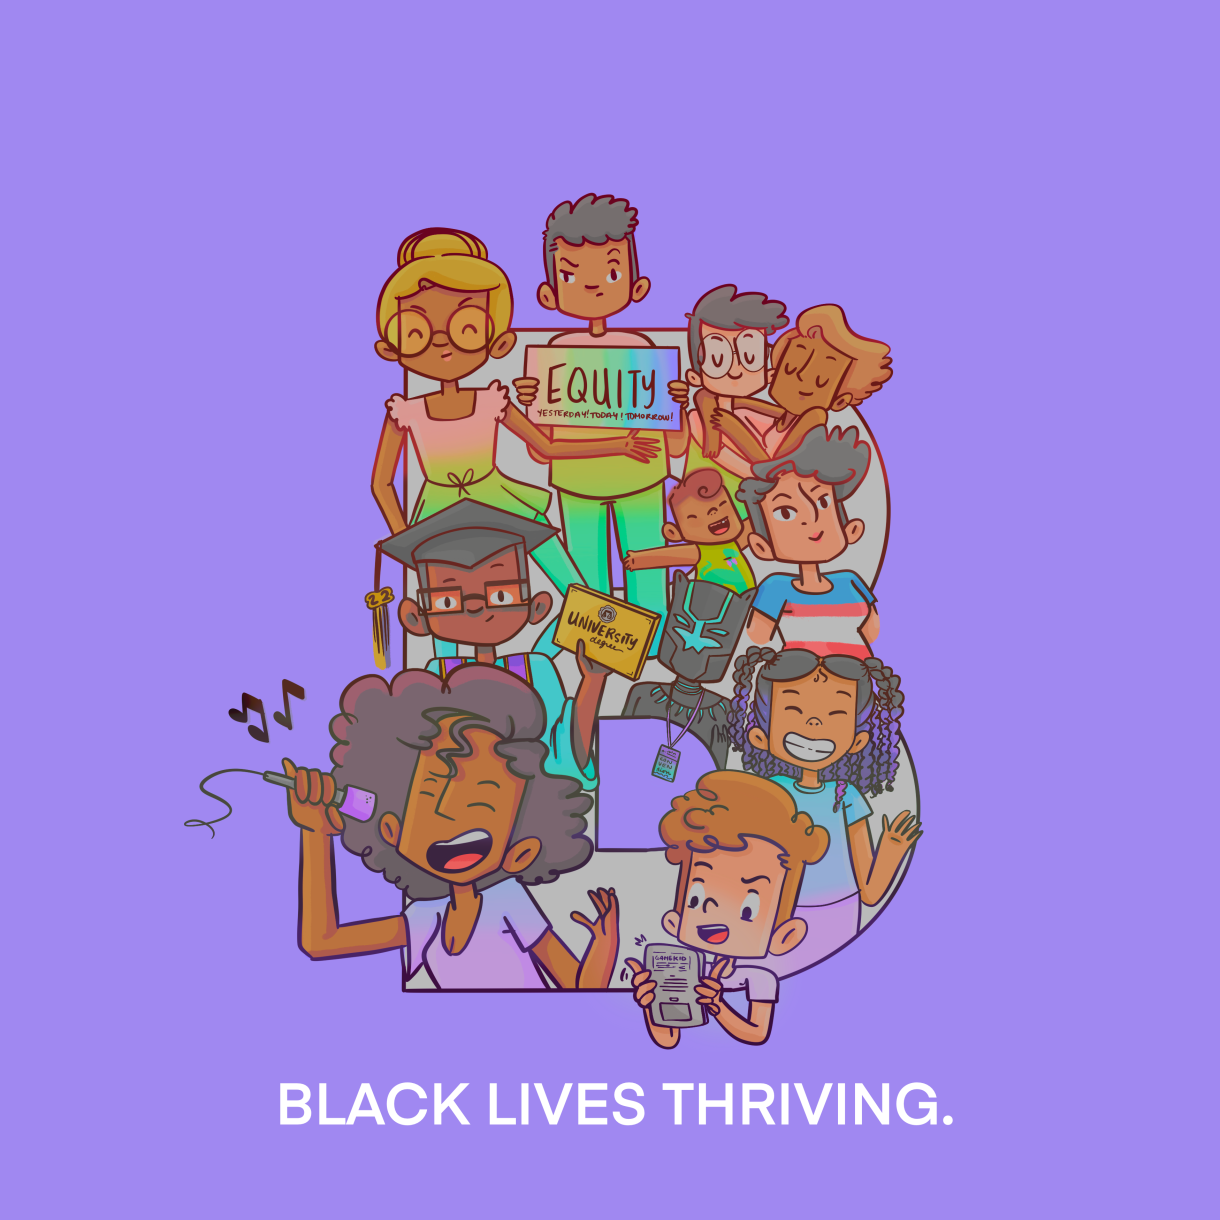 Against a lavender background is a a faint outline of letter B, bursting beyond the seams of that outline are a variety of different Black people, clockwisee: A young Black child holding up a rainbow Equality sign, a black couple one with short black hair and light skin and one with blonde hair and a small child, a black person in shirt with the trans Pride flag, T'Challa from Black Panther, a young black girl with braids and a turquoise t-shirt, a young light skin black child with red hair playing a video game, a Black woman singer, a Black child with glasses graduating, and a Black woman with a blonde bun wearing glasses. Beneath them is all white text: Black Lives Thriving.